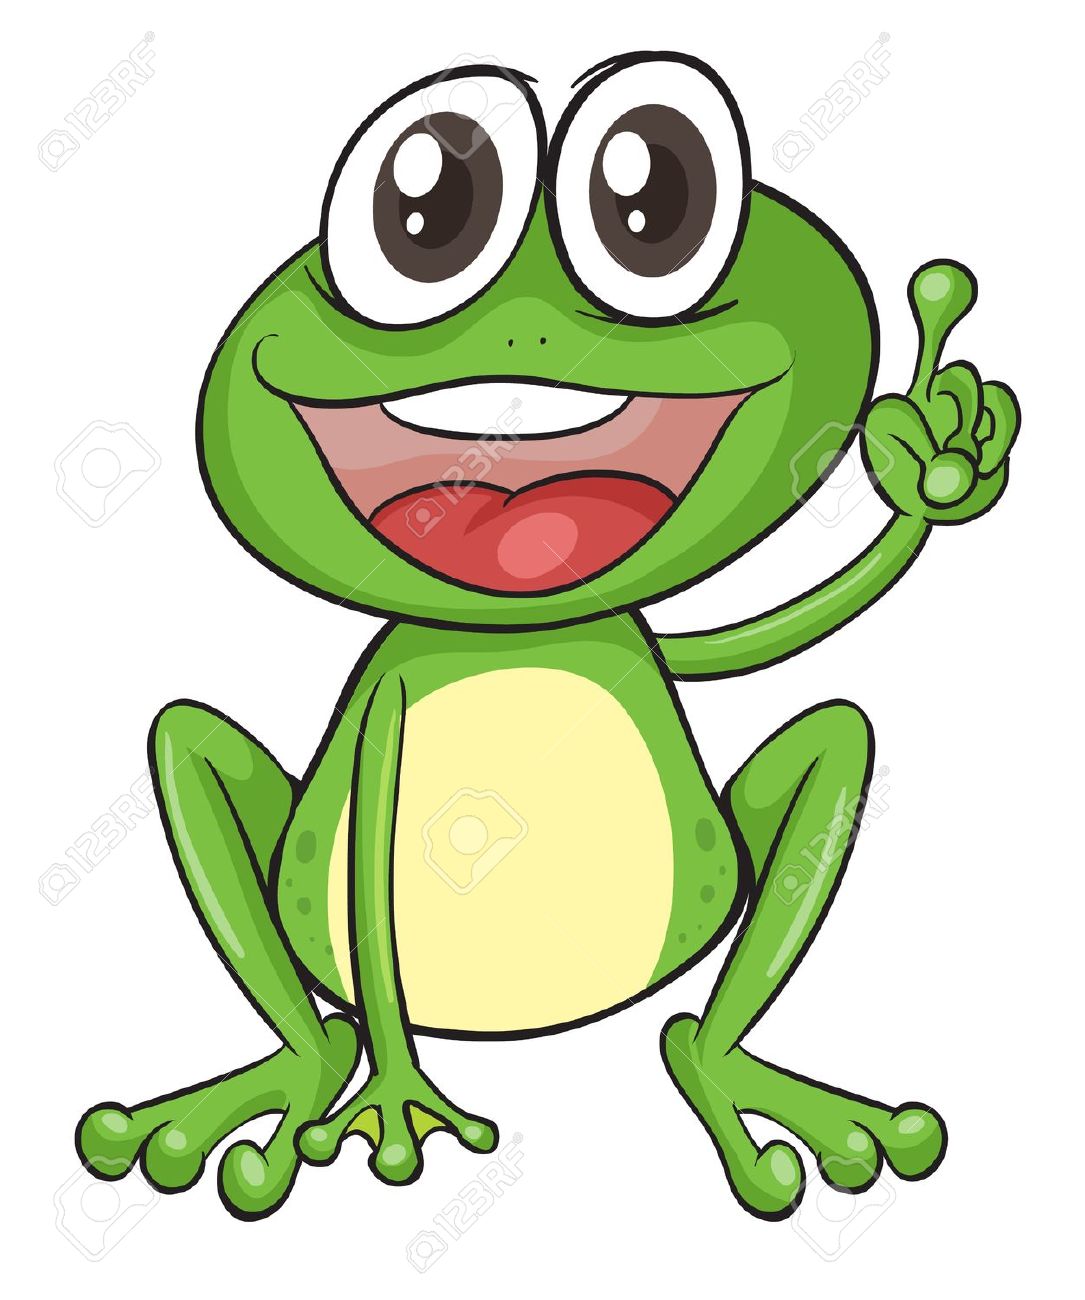 Free frog clip art drawings and colorful images 2 image 8